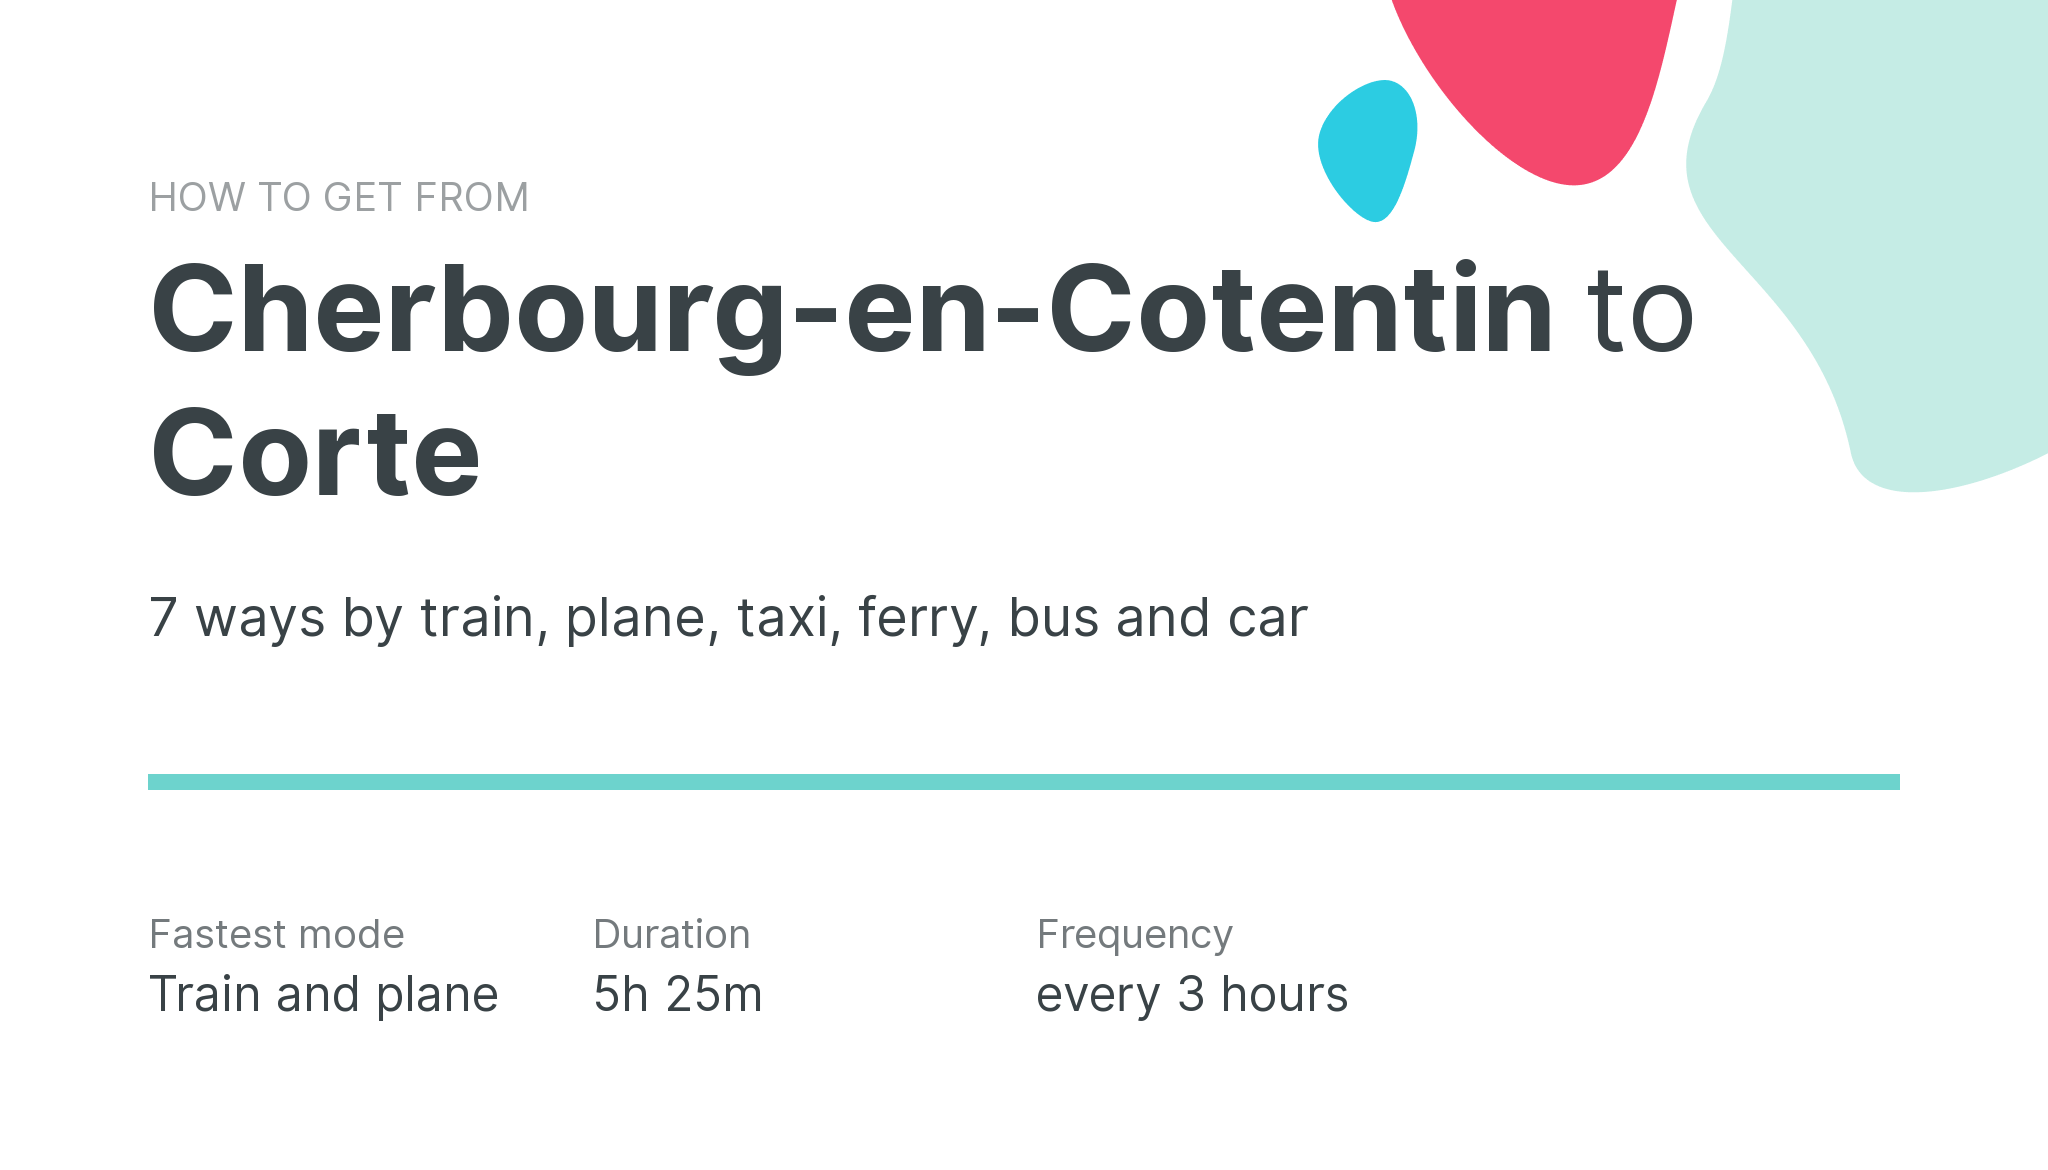 How do I get from Cherbourg-en-Cotentin to Corte